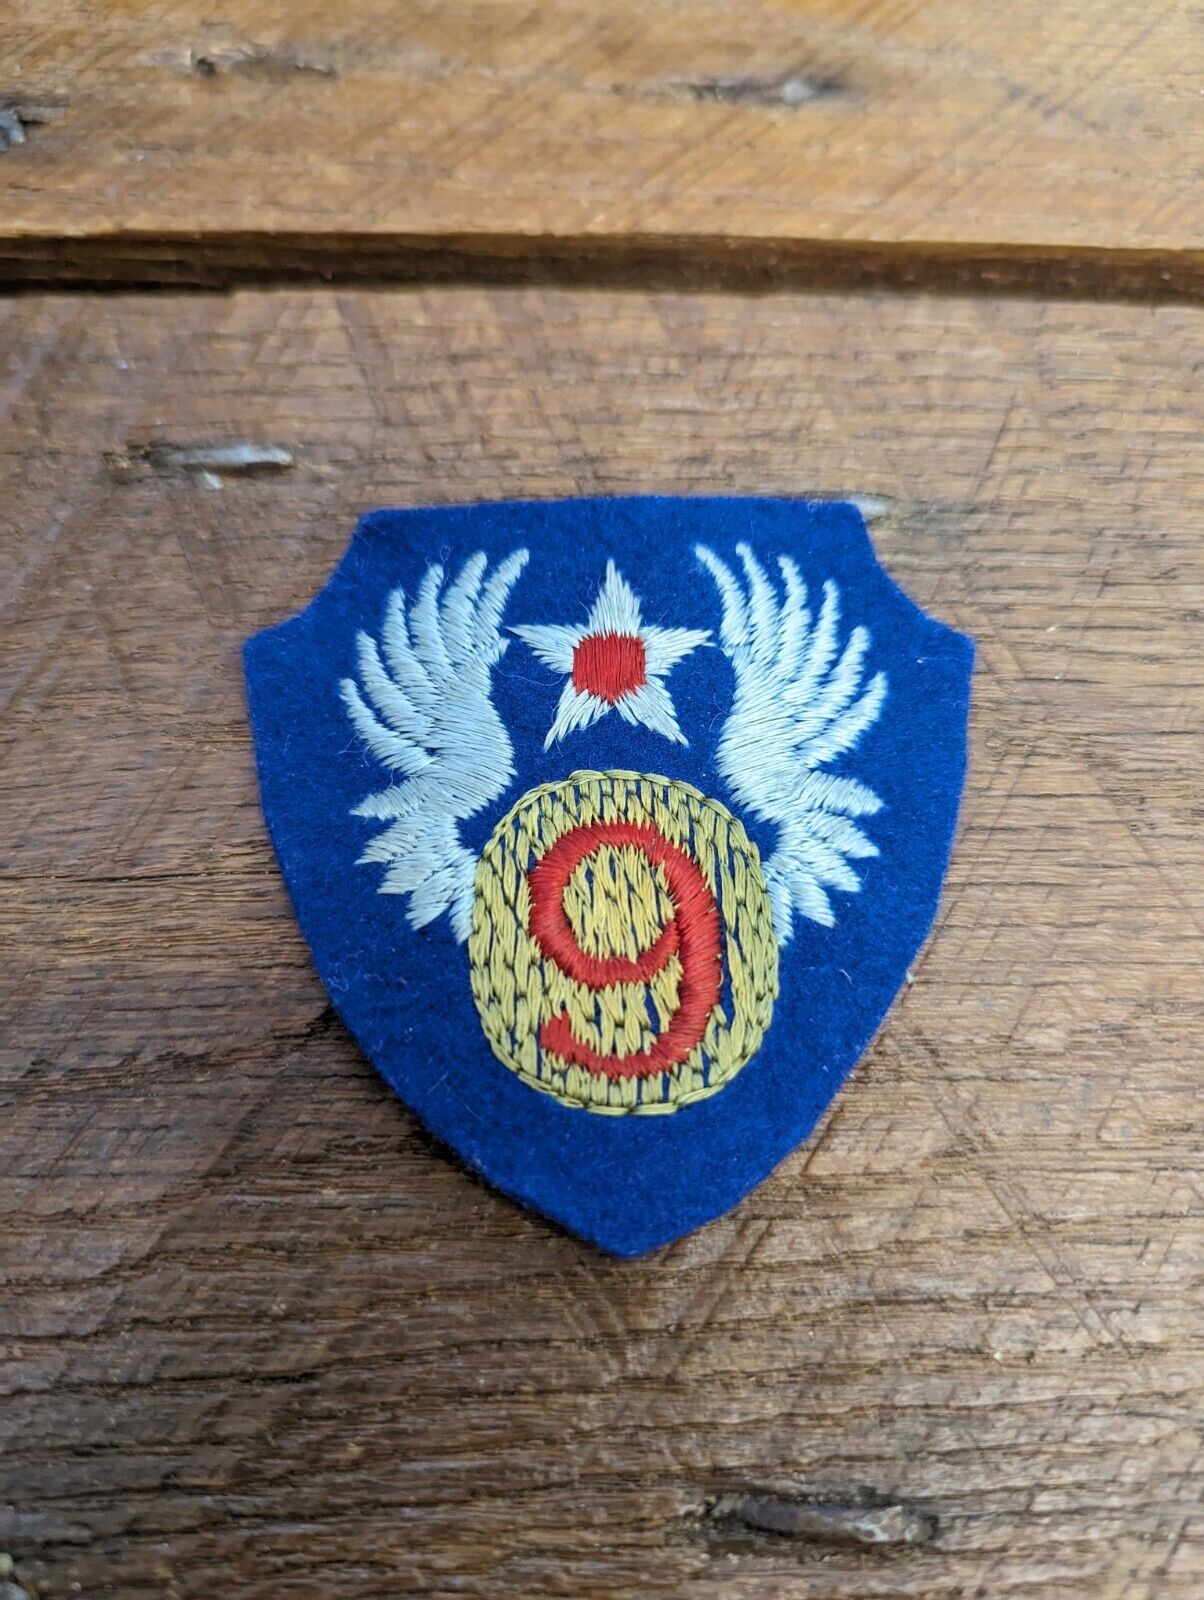 Vintage WWII US Military 9th Army Air Force Insignia Cut-Felt Shoulder Patch